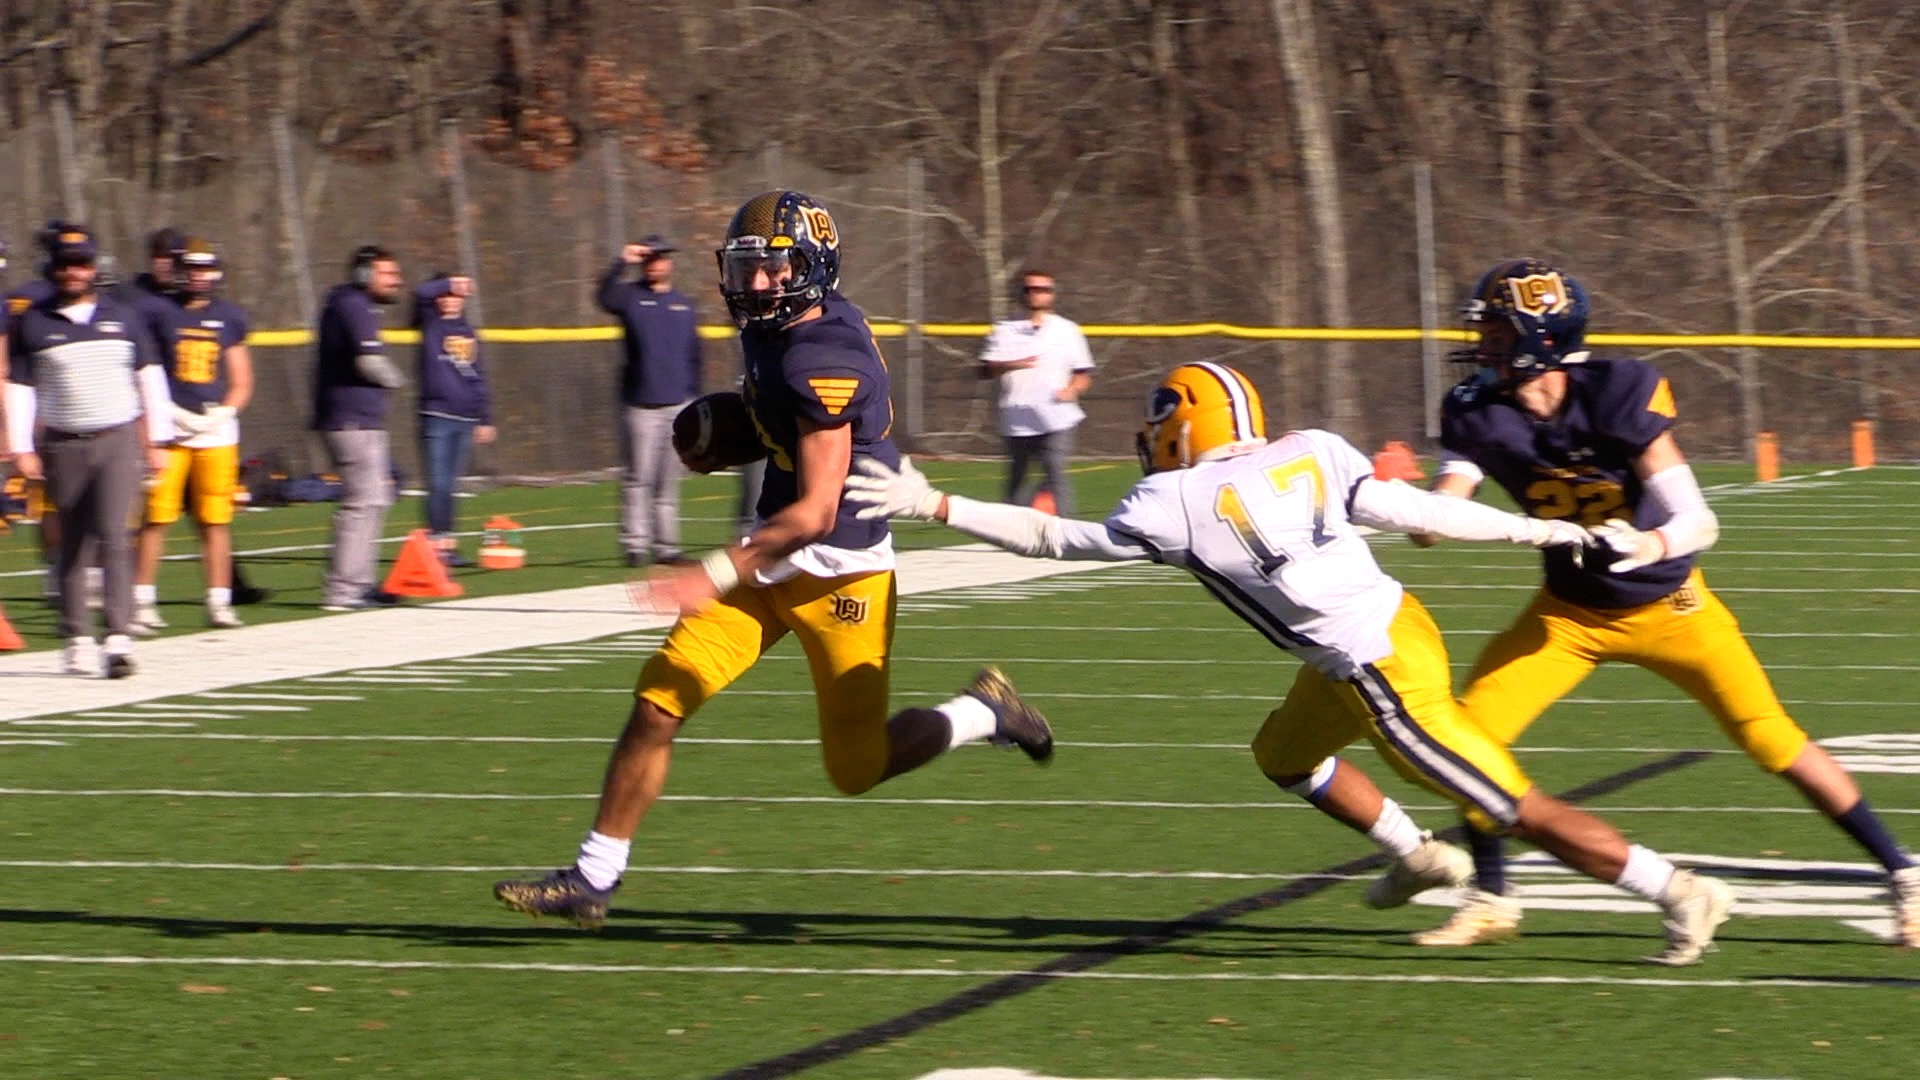 woodstock-academy-wins-1st-football-championship-tops-ledyard-for-ecc-division-ii-title